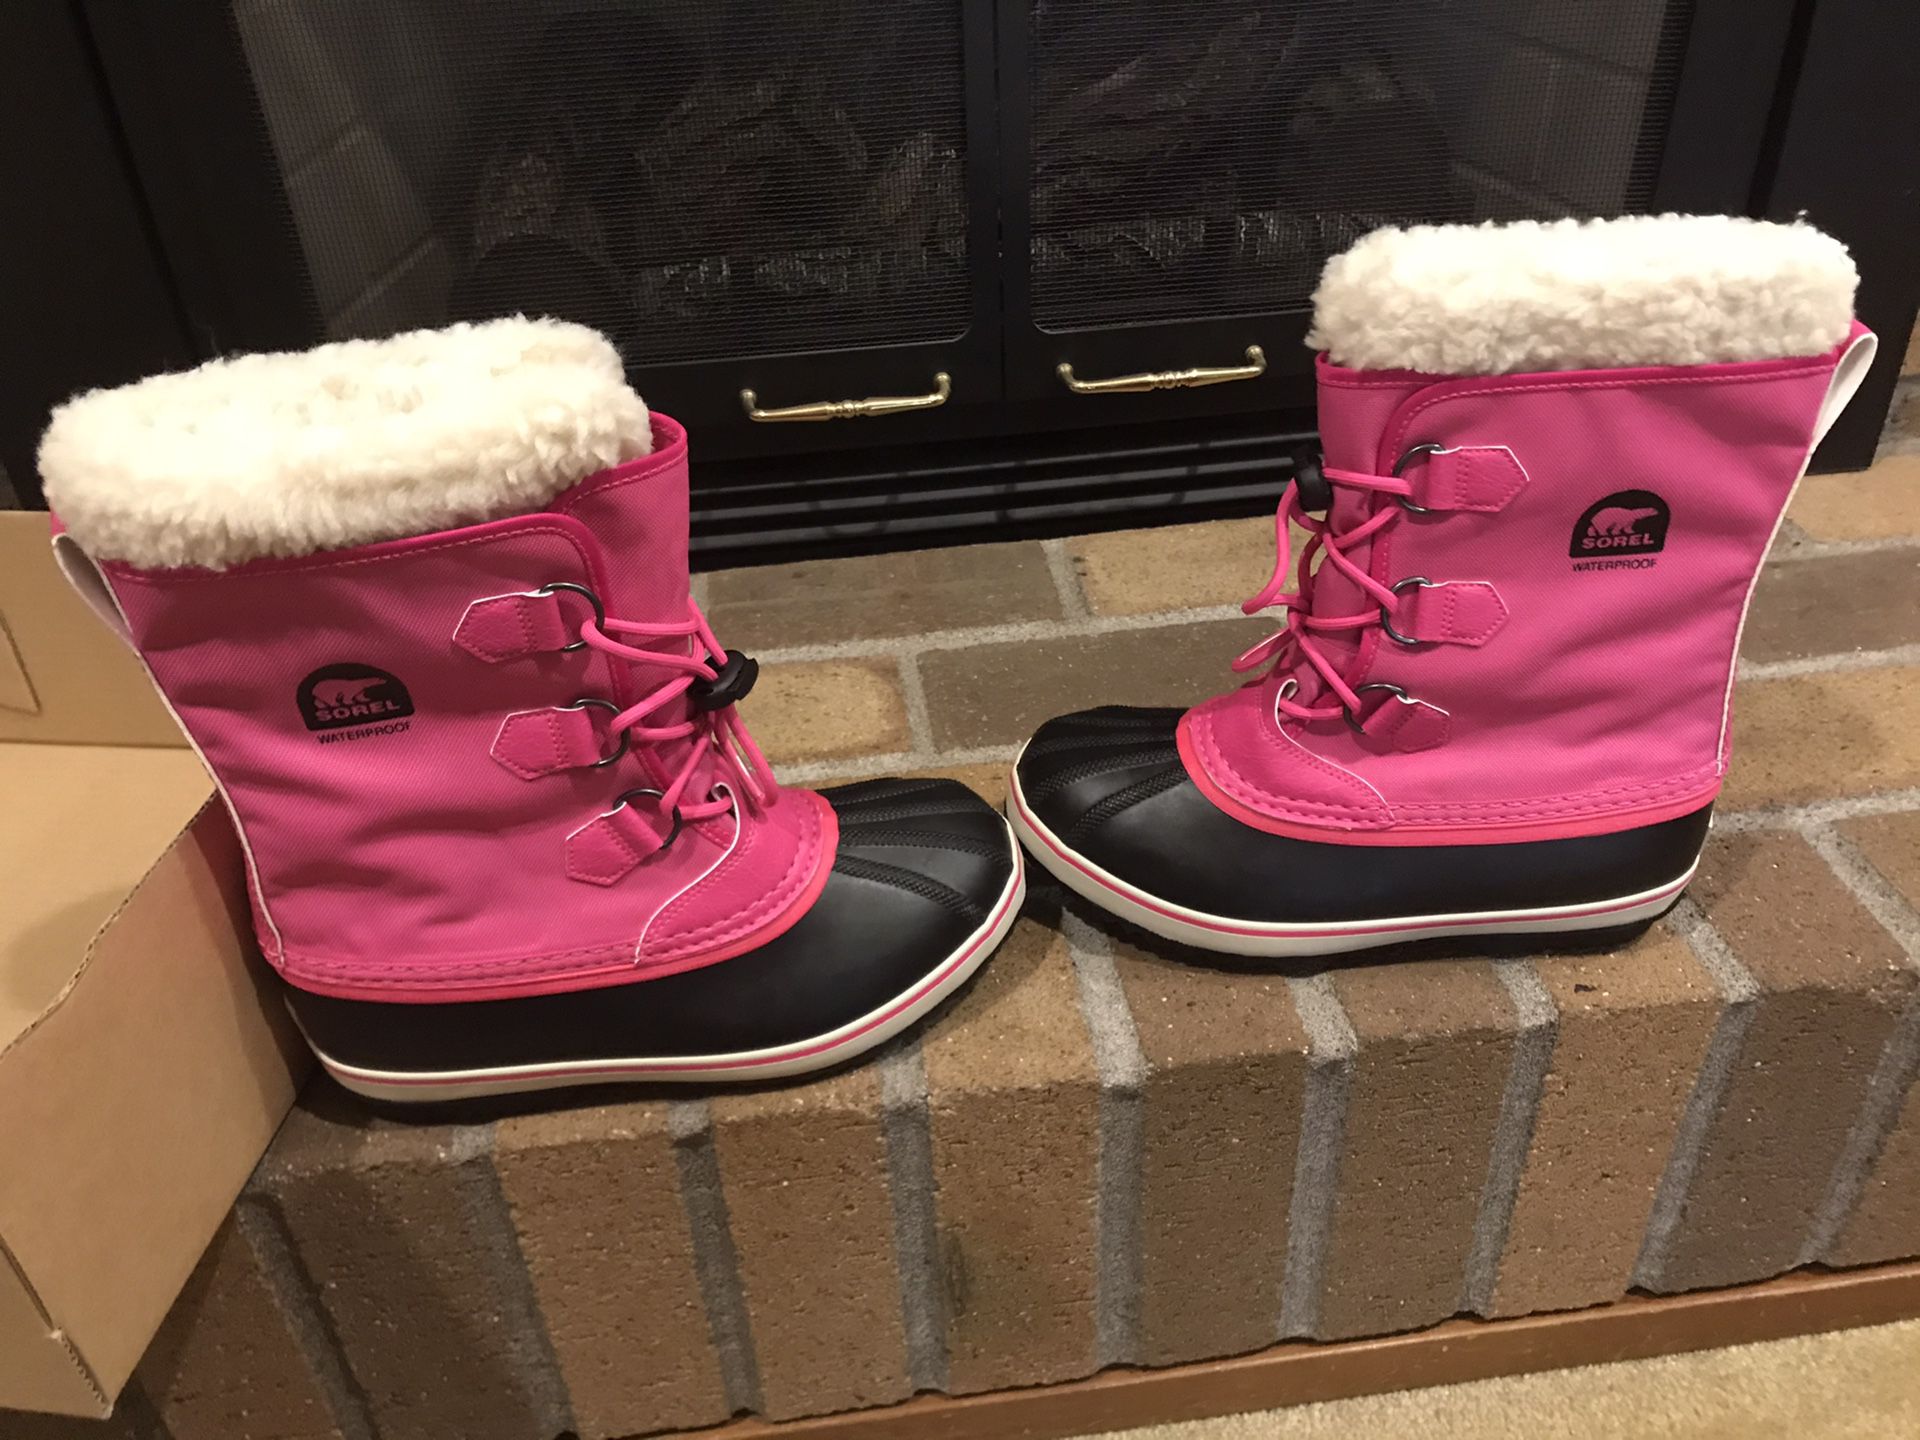 Youth “big girls’ sorel snow boots brand new size 6